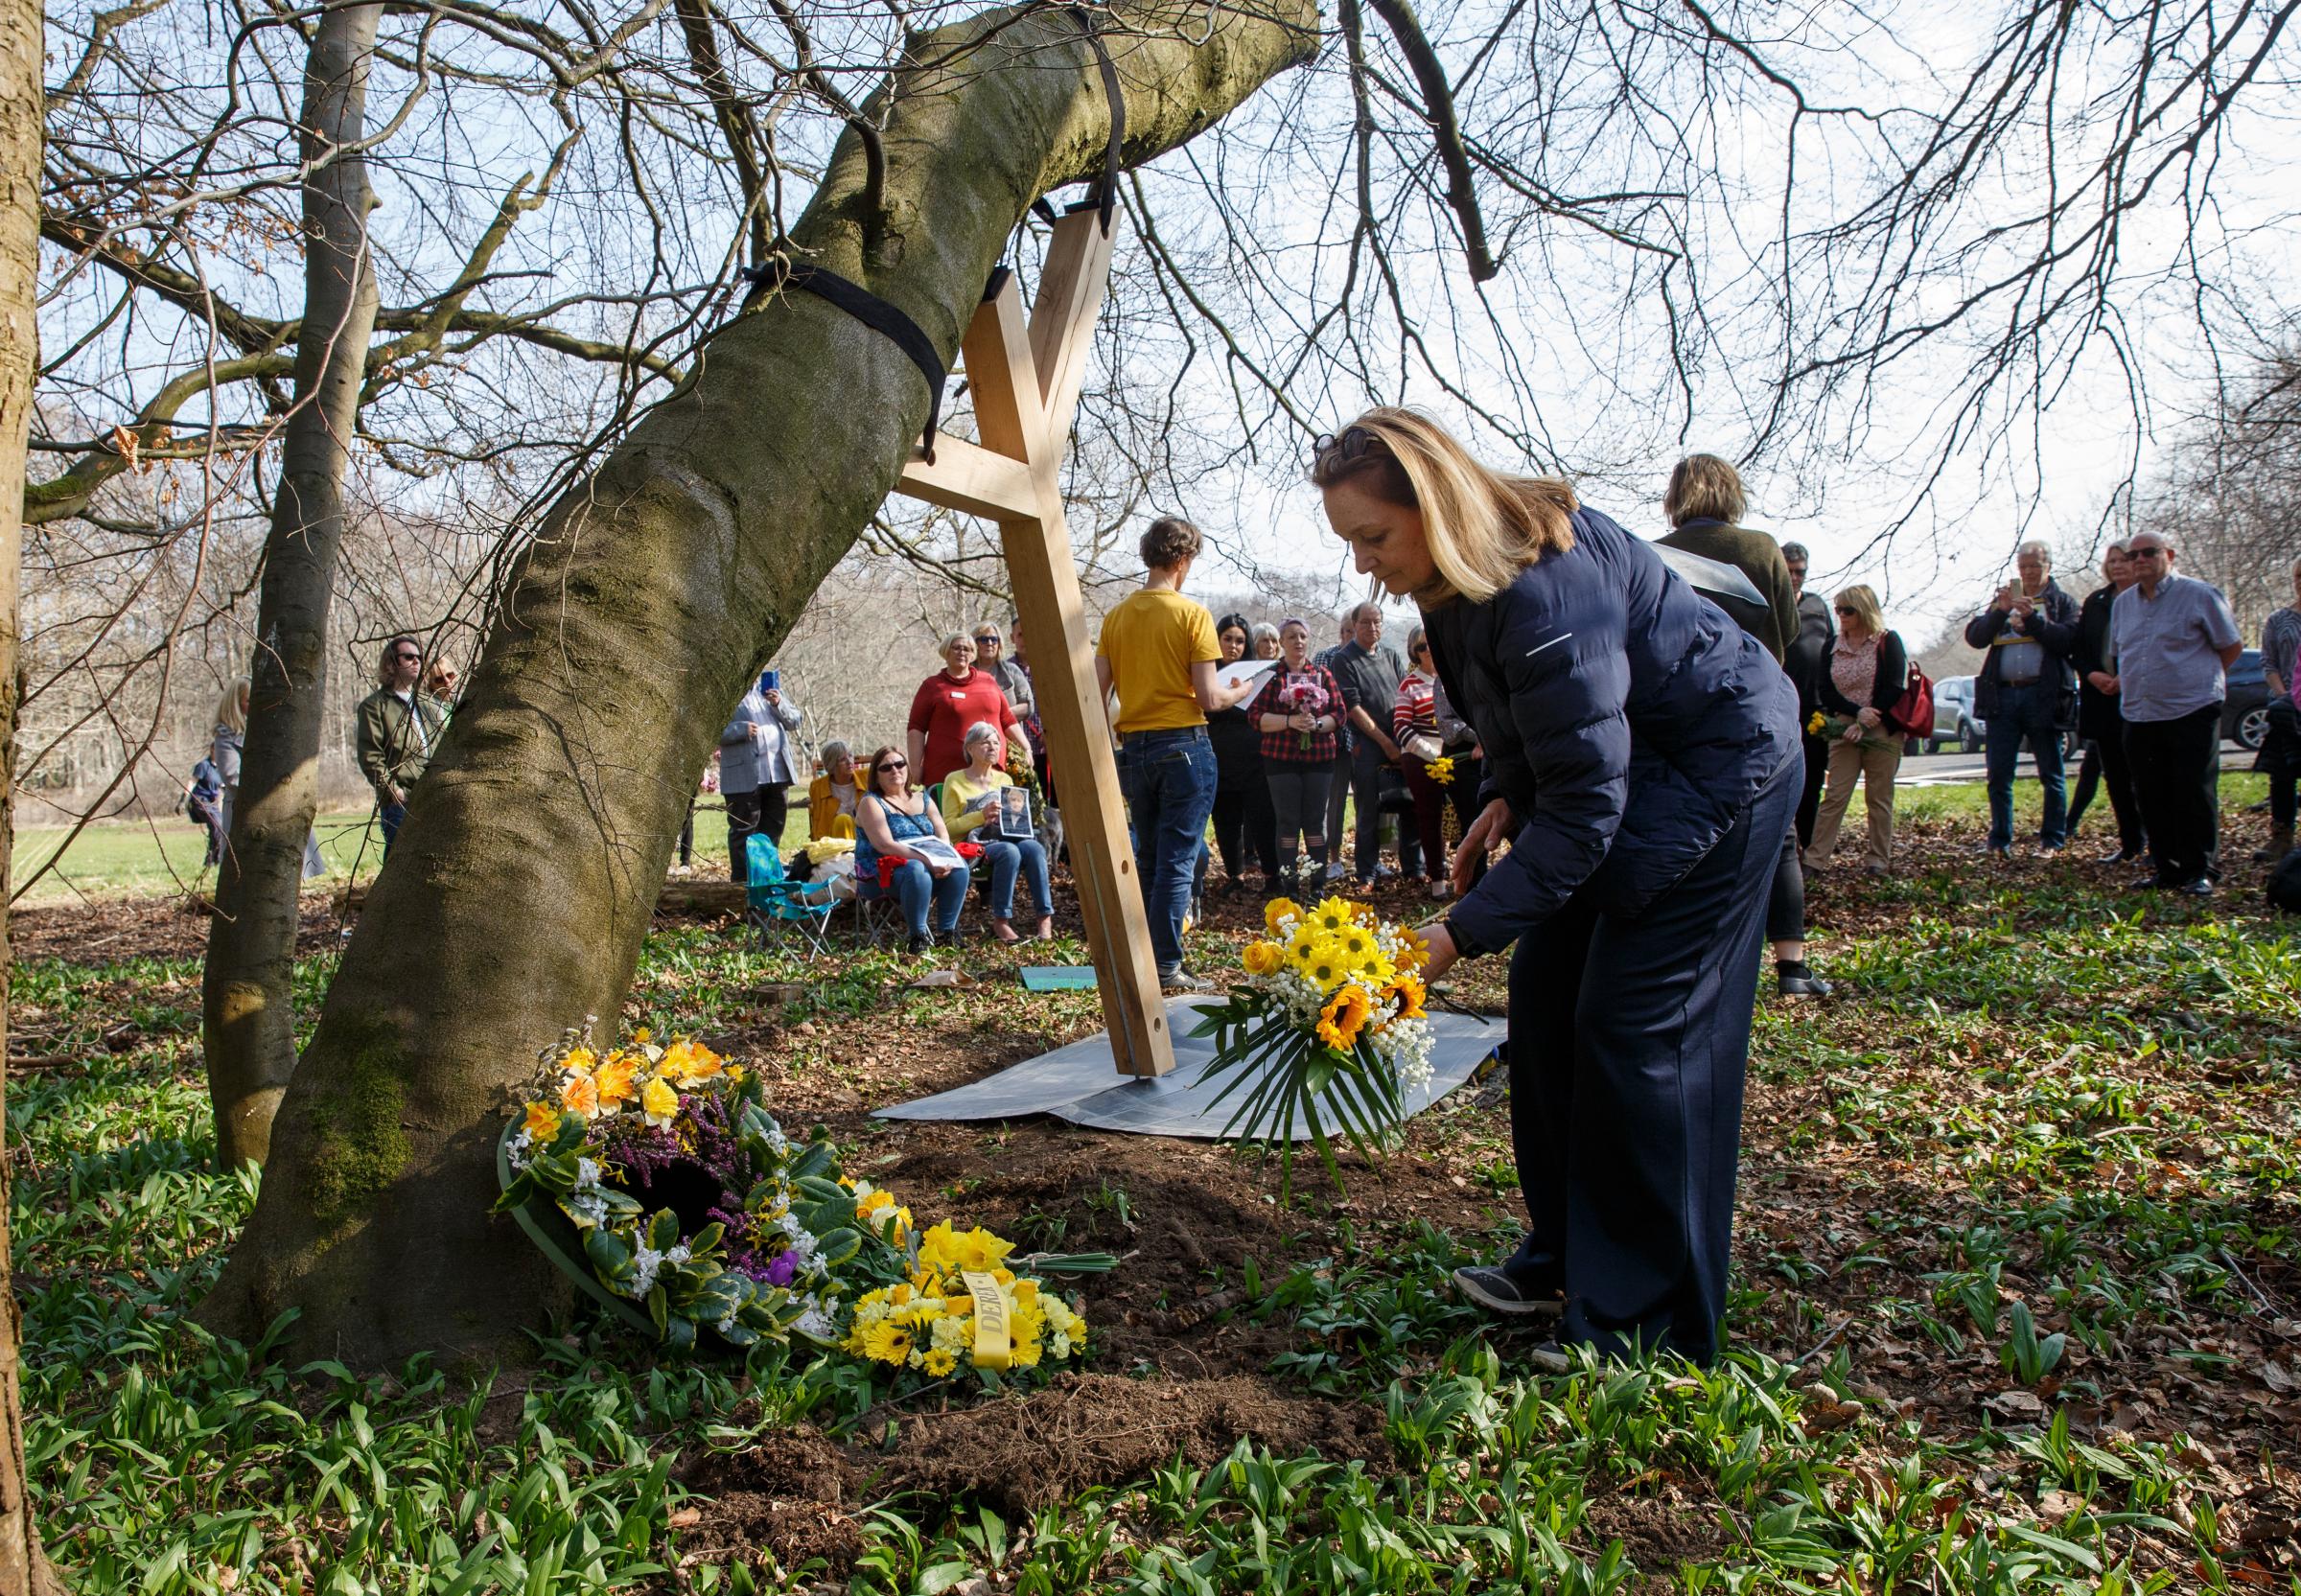 People place bouquets of flowers next to a tree at Pollok Country park, Glasgow on the second anniversary of the first Covid lockdown. Next to the floral tributes is the first of a series of wooden tree supports created by The Heralds covid memorial